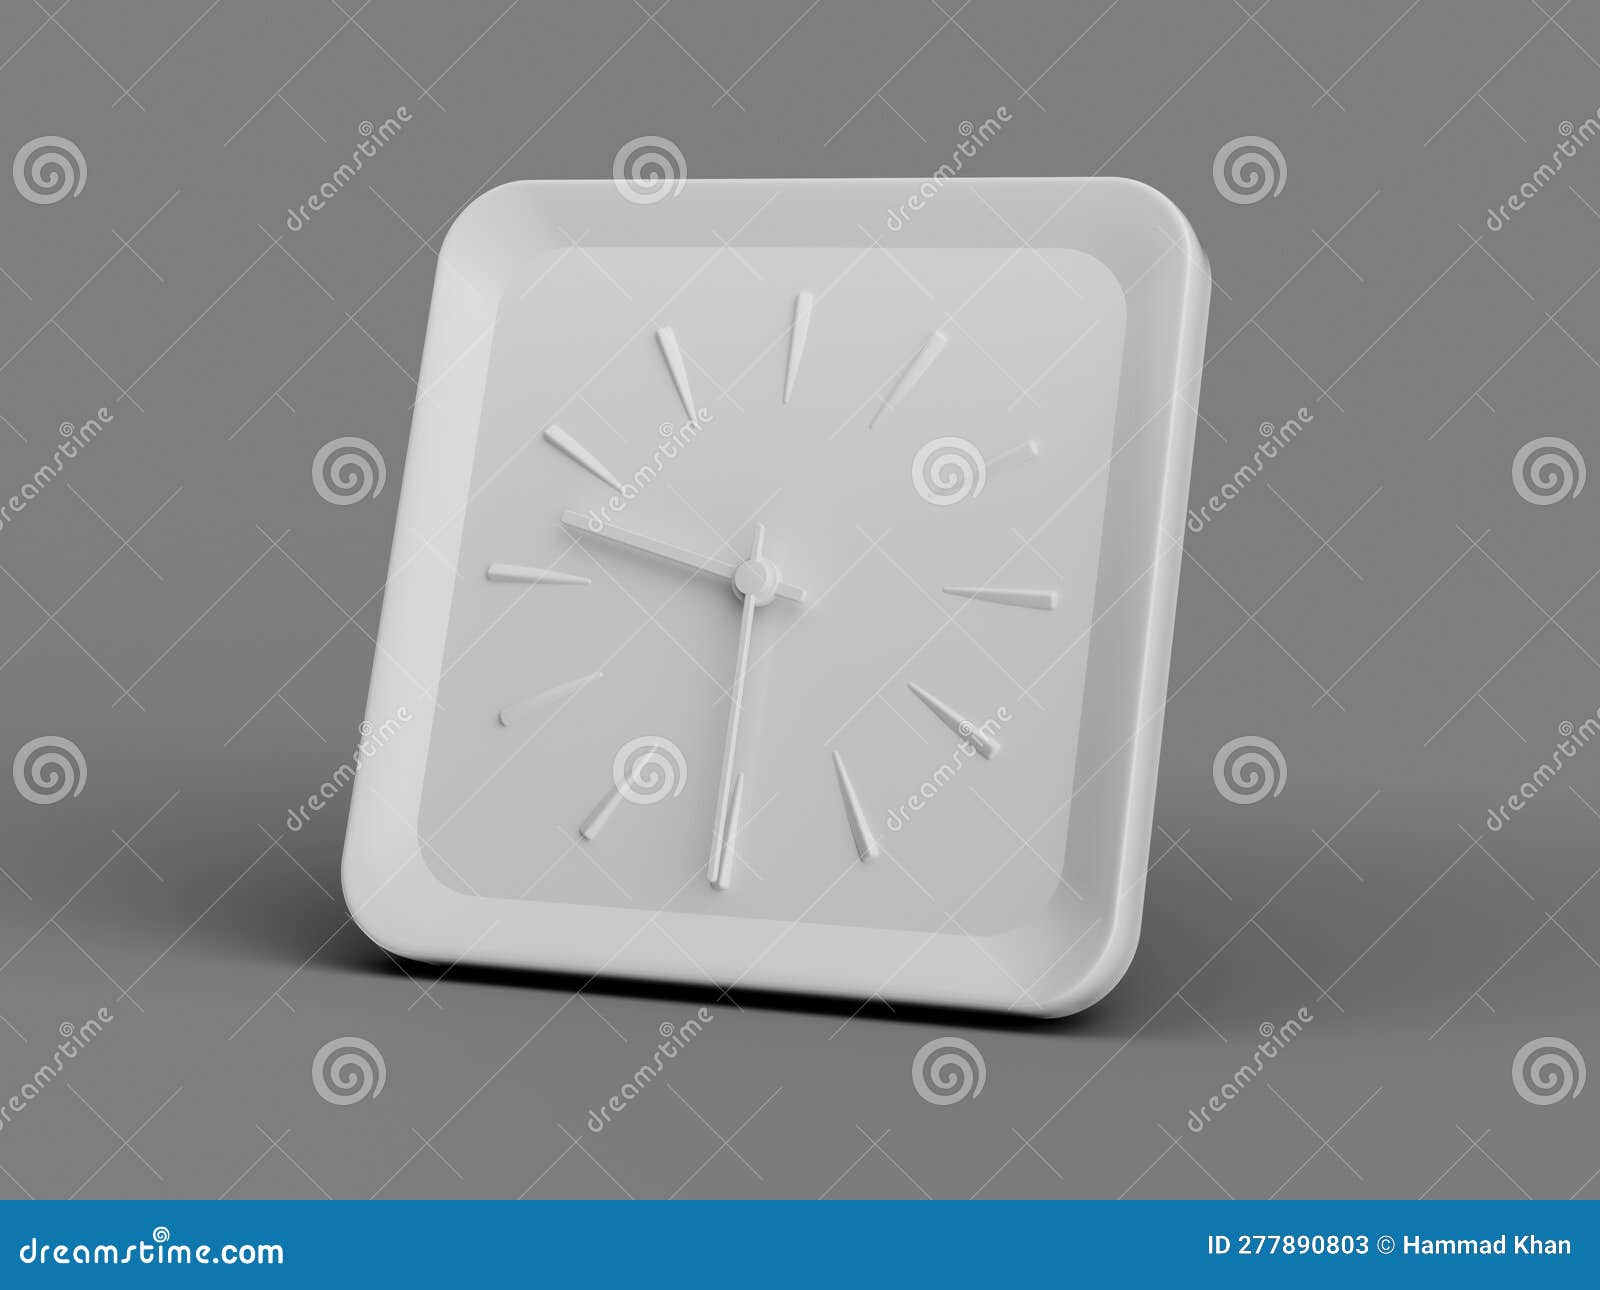 3d Simple White Square Wall Clock, 9:30 Nine Thirty Half Past 9